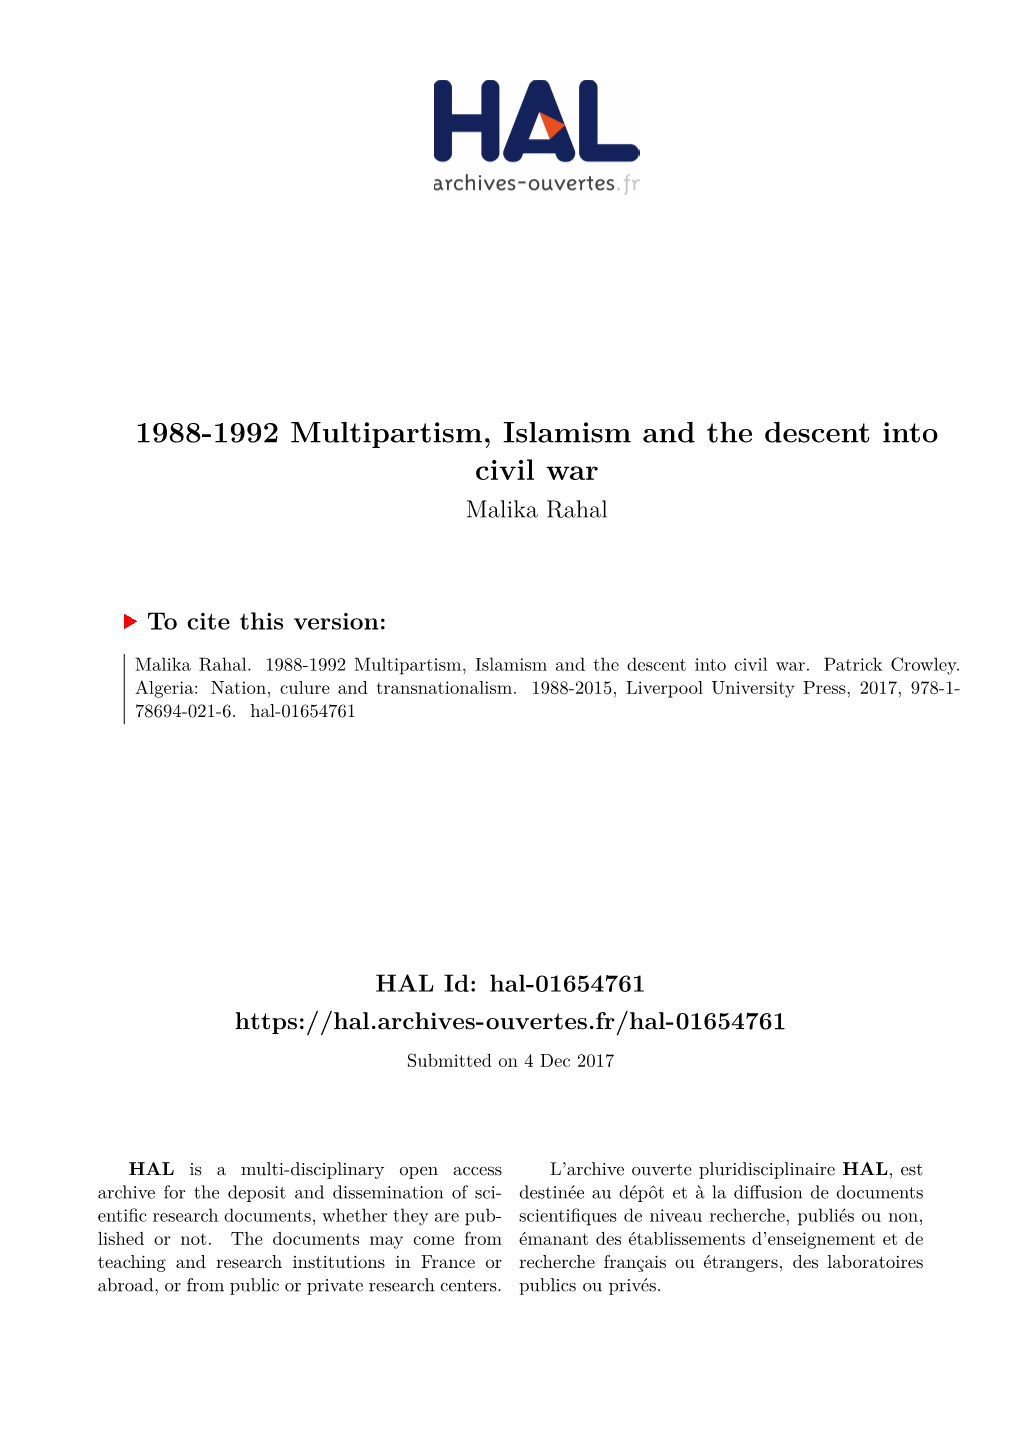 1988-1992 Multipartism, Islamism and the Descent Into Civil War Malika Rahal